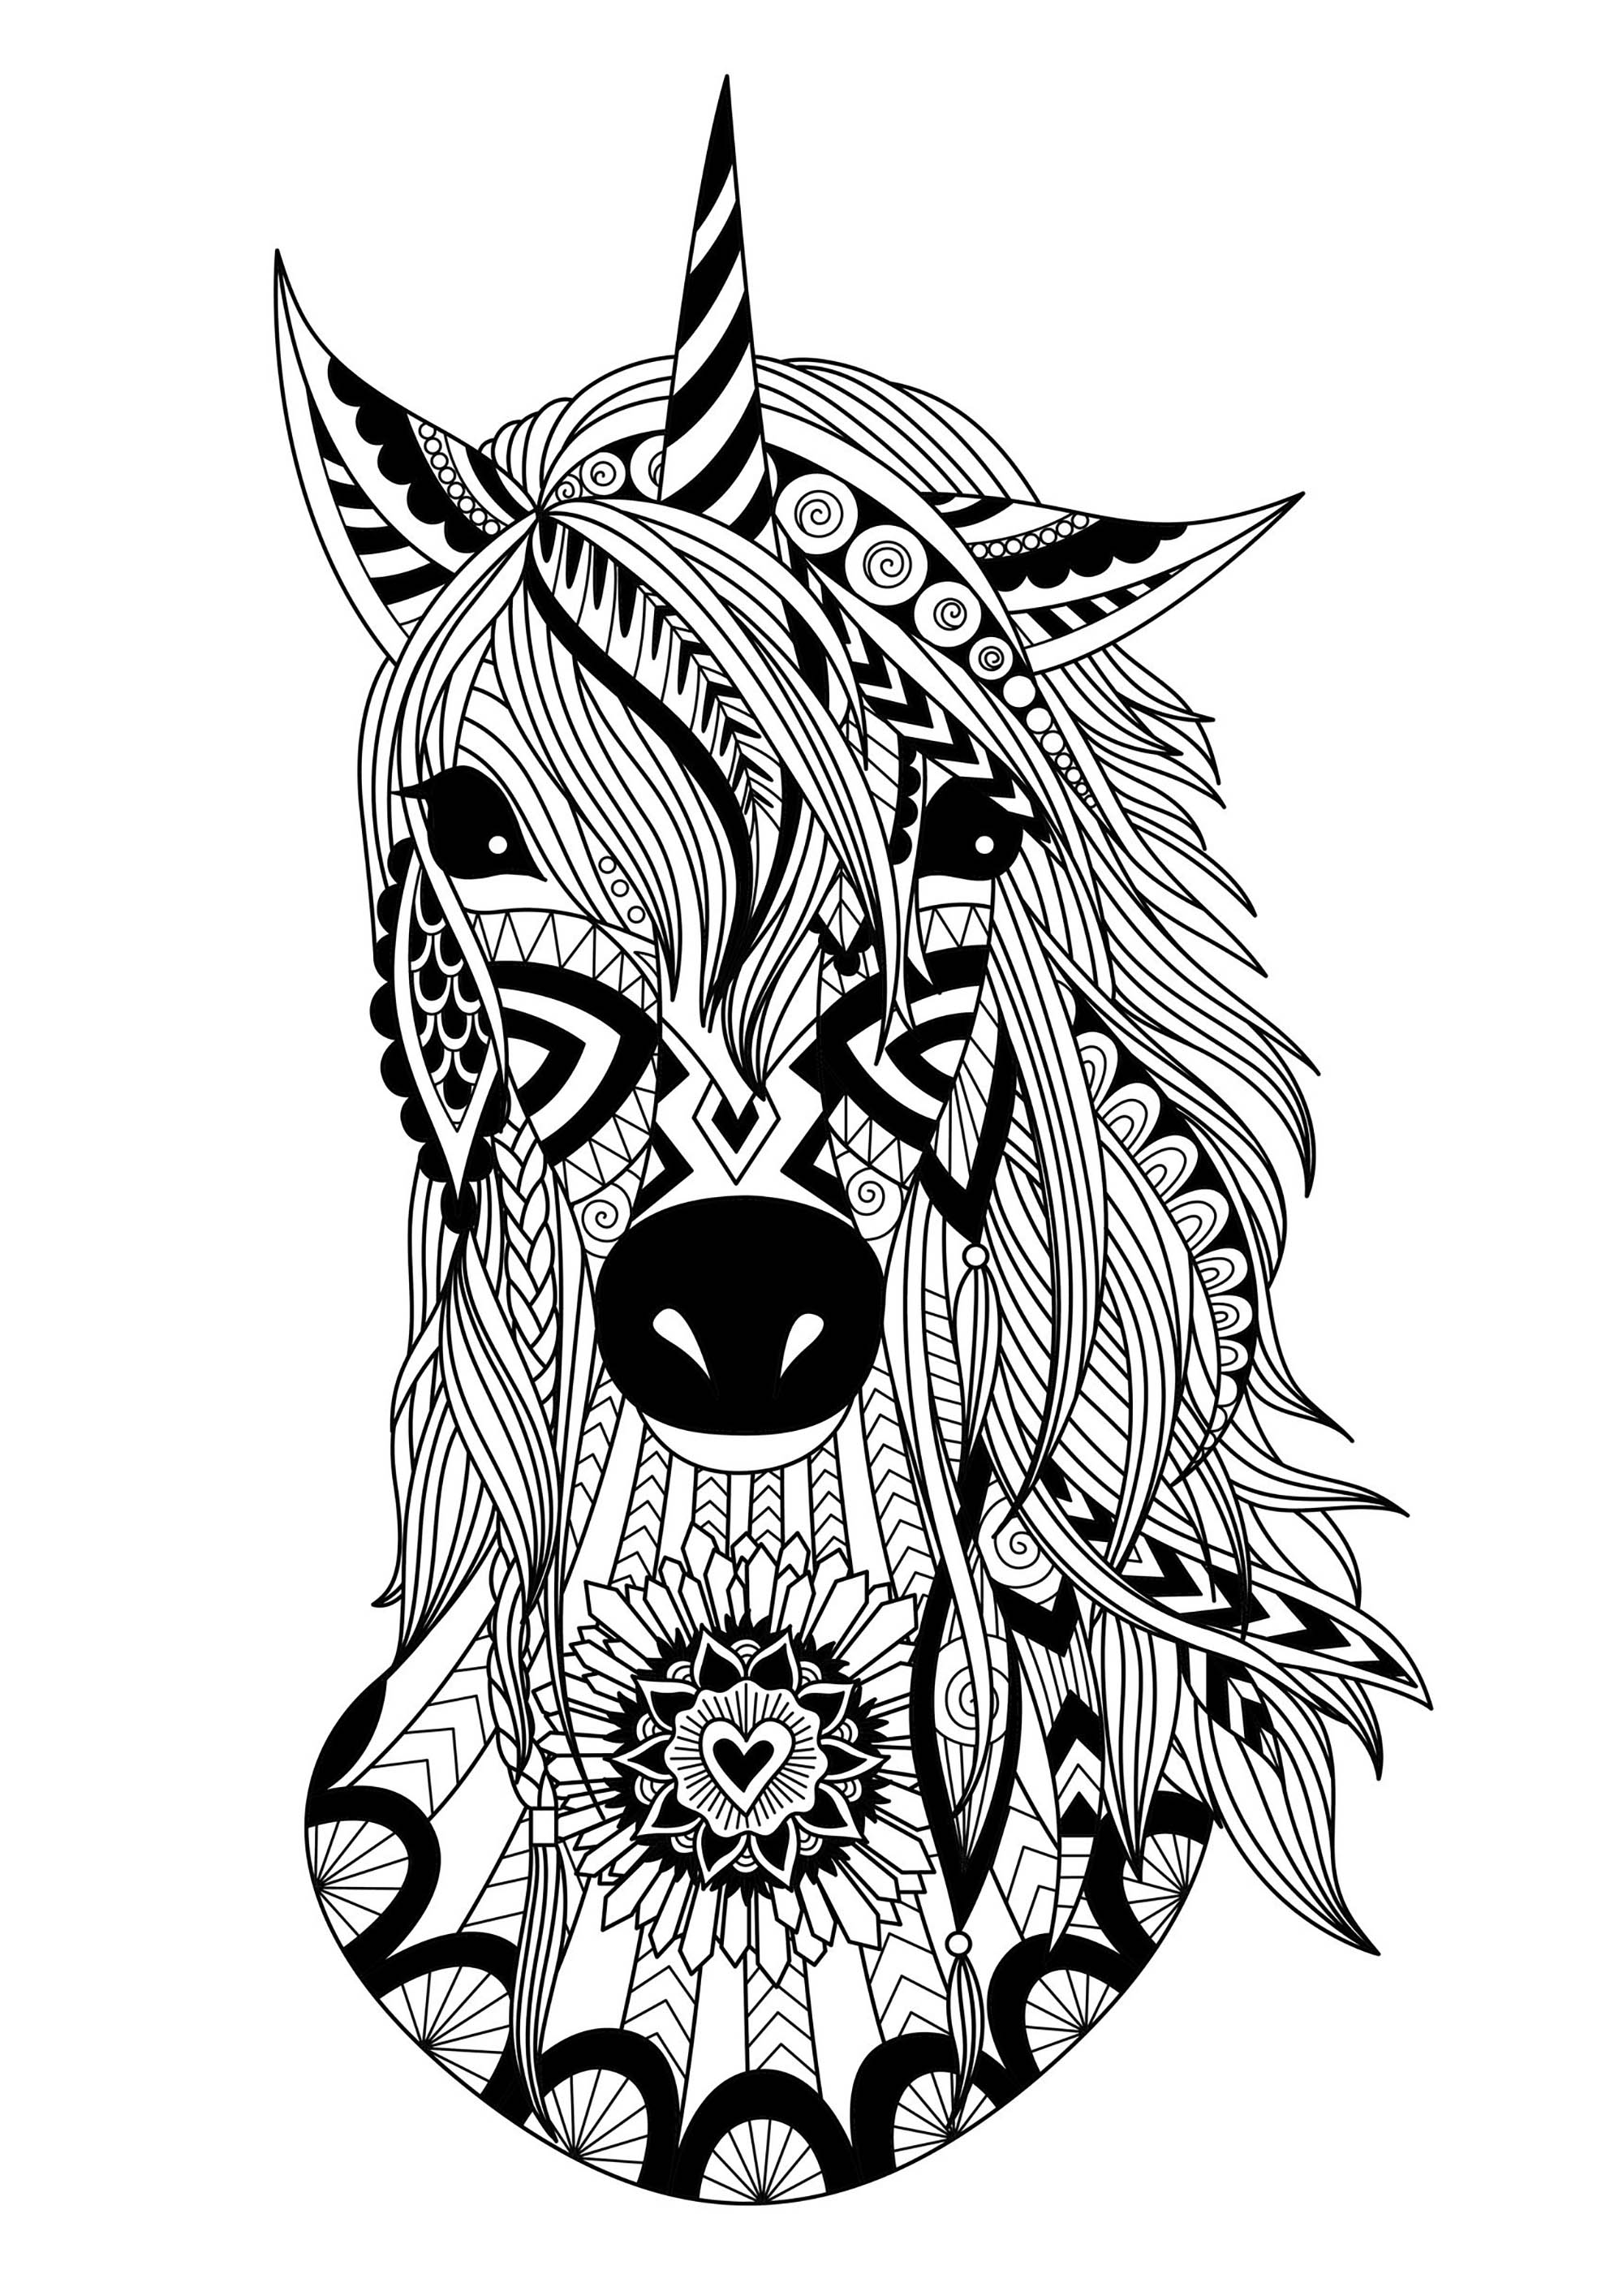 Download Unicorn zentangle simple - Unicorns Adult Coloring Pages